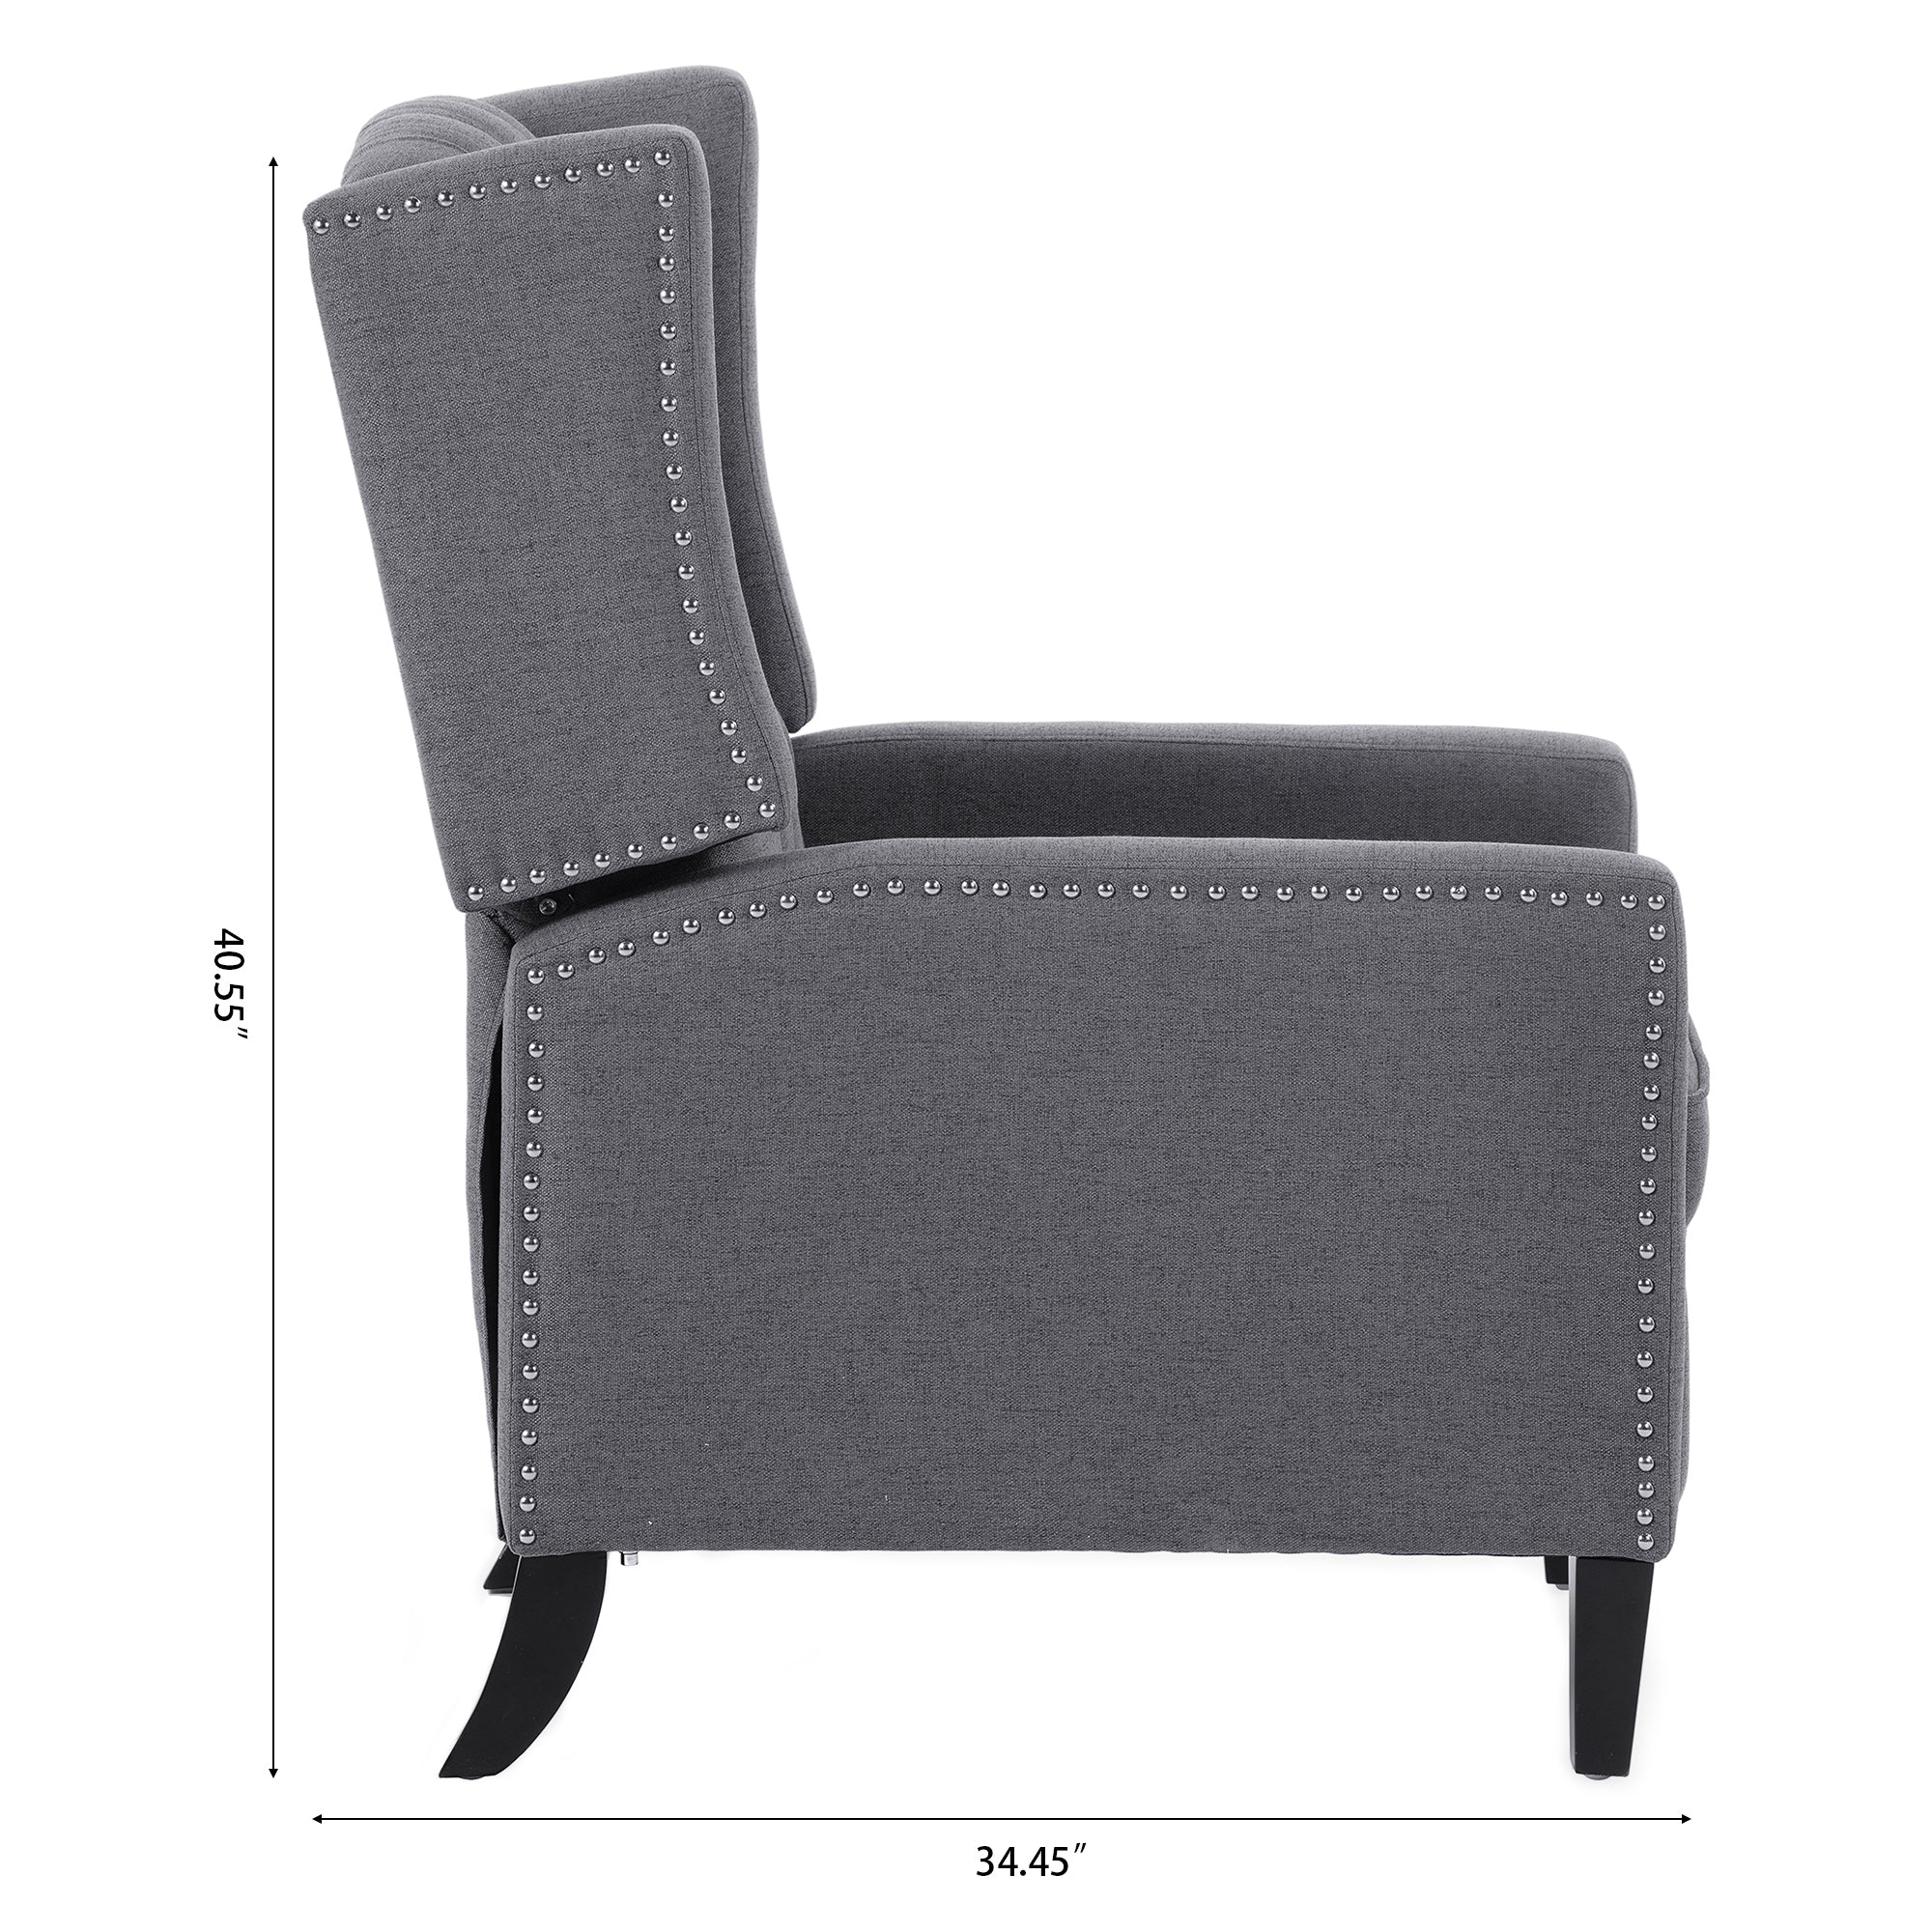 Blaine Grey Linen Fabric Pushback Recliner Wing Chair With Nailhead Trim